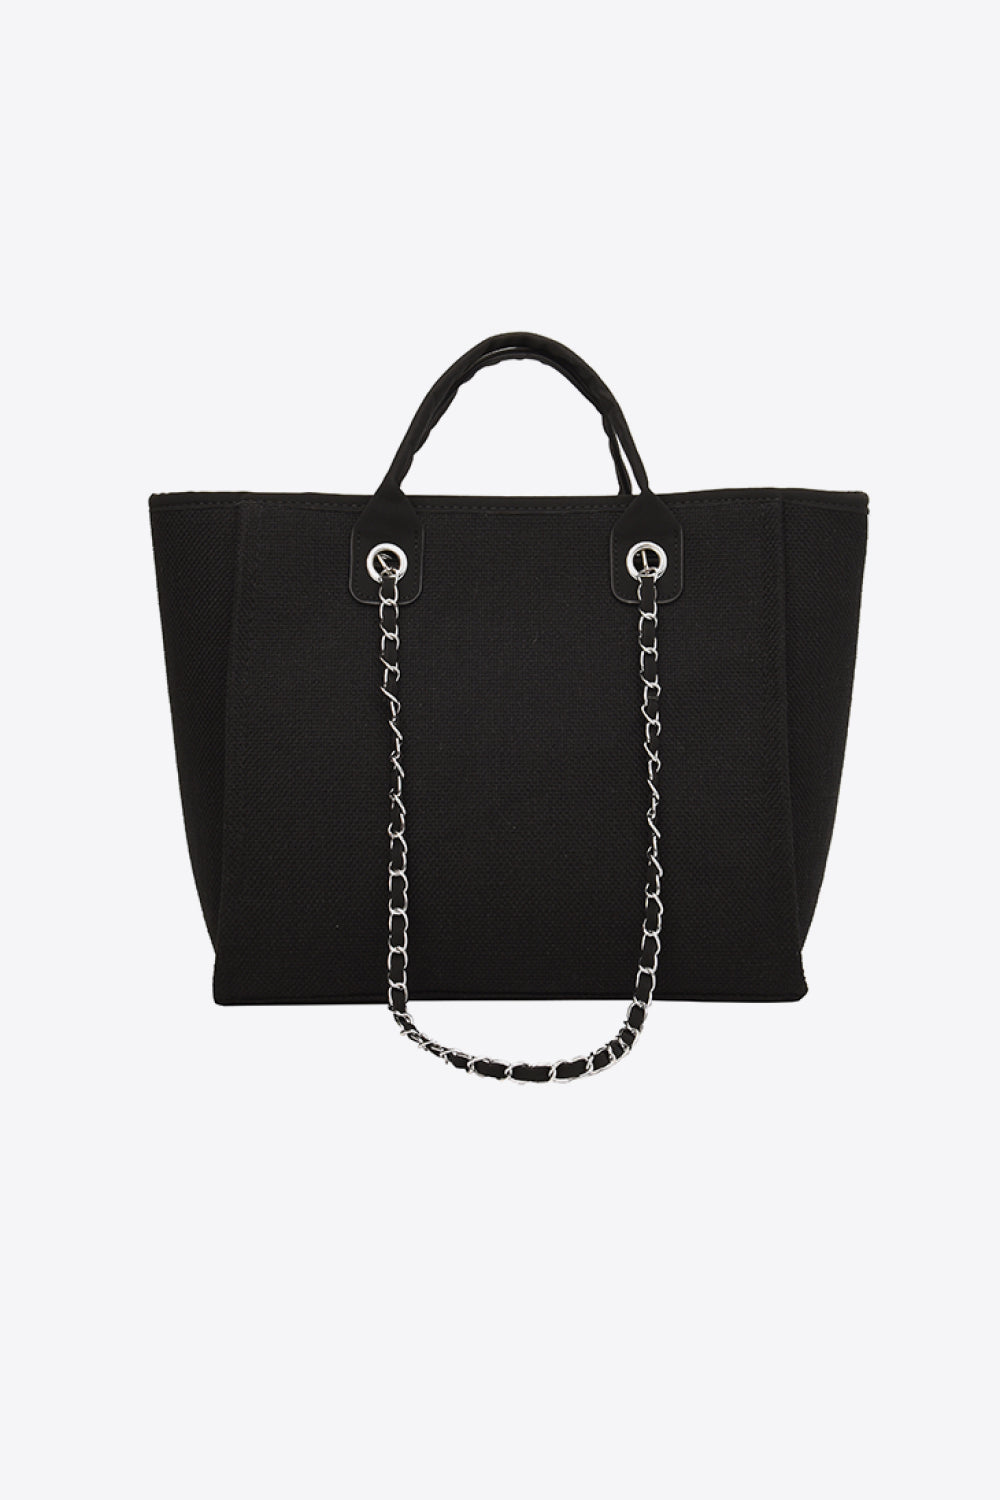 PREORDER- Polyester Tote Bag